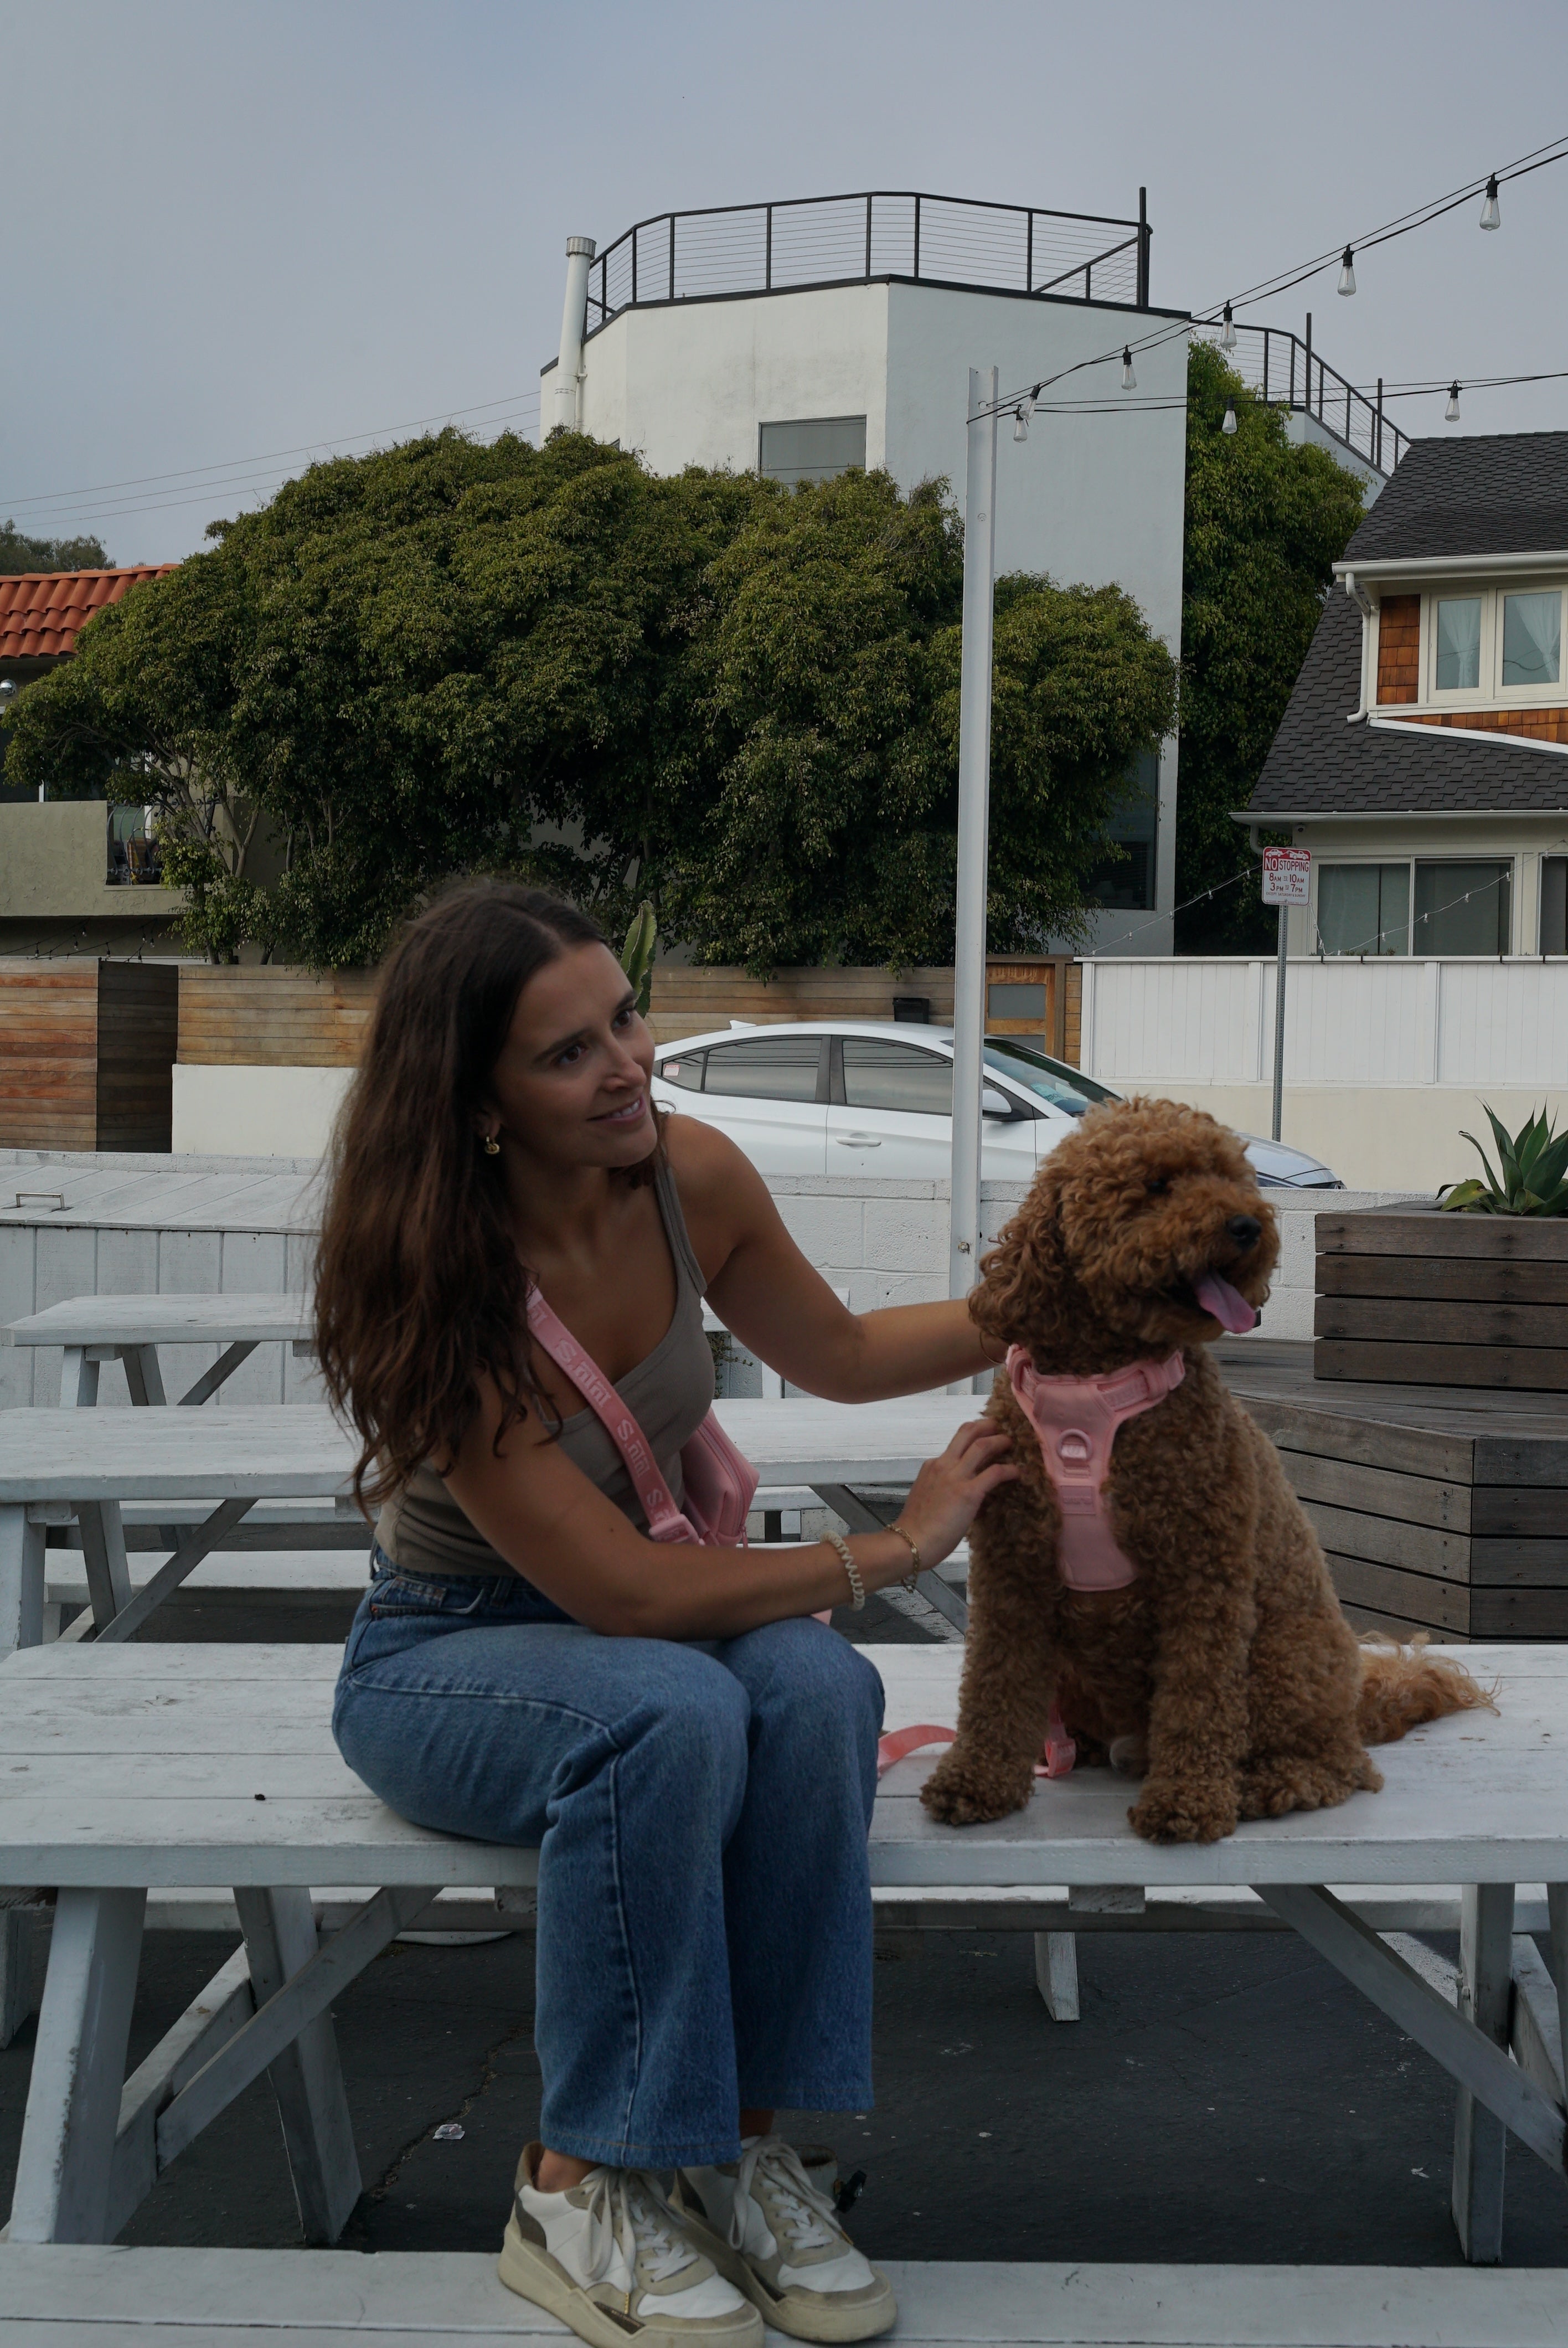 a woman sitting on a white picnic table next to a fluffy, curly-coated dog wearing a Blush Pink harness and leash from Lulu's brand. The woman, dressed in blue jeans, white sneakers, and a gray tank top, is smiling and petting the dog. The dog is sitting on the bench, facing right with its tongue out, appearing happy and content. In the background are buildings, a white car, trees, and string lights, creating a casual and relaxed outdoor setting.